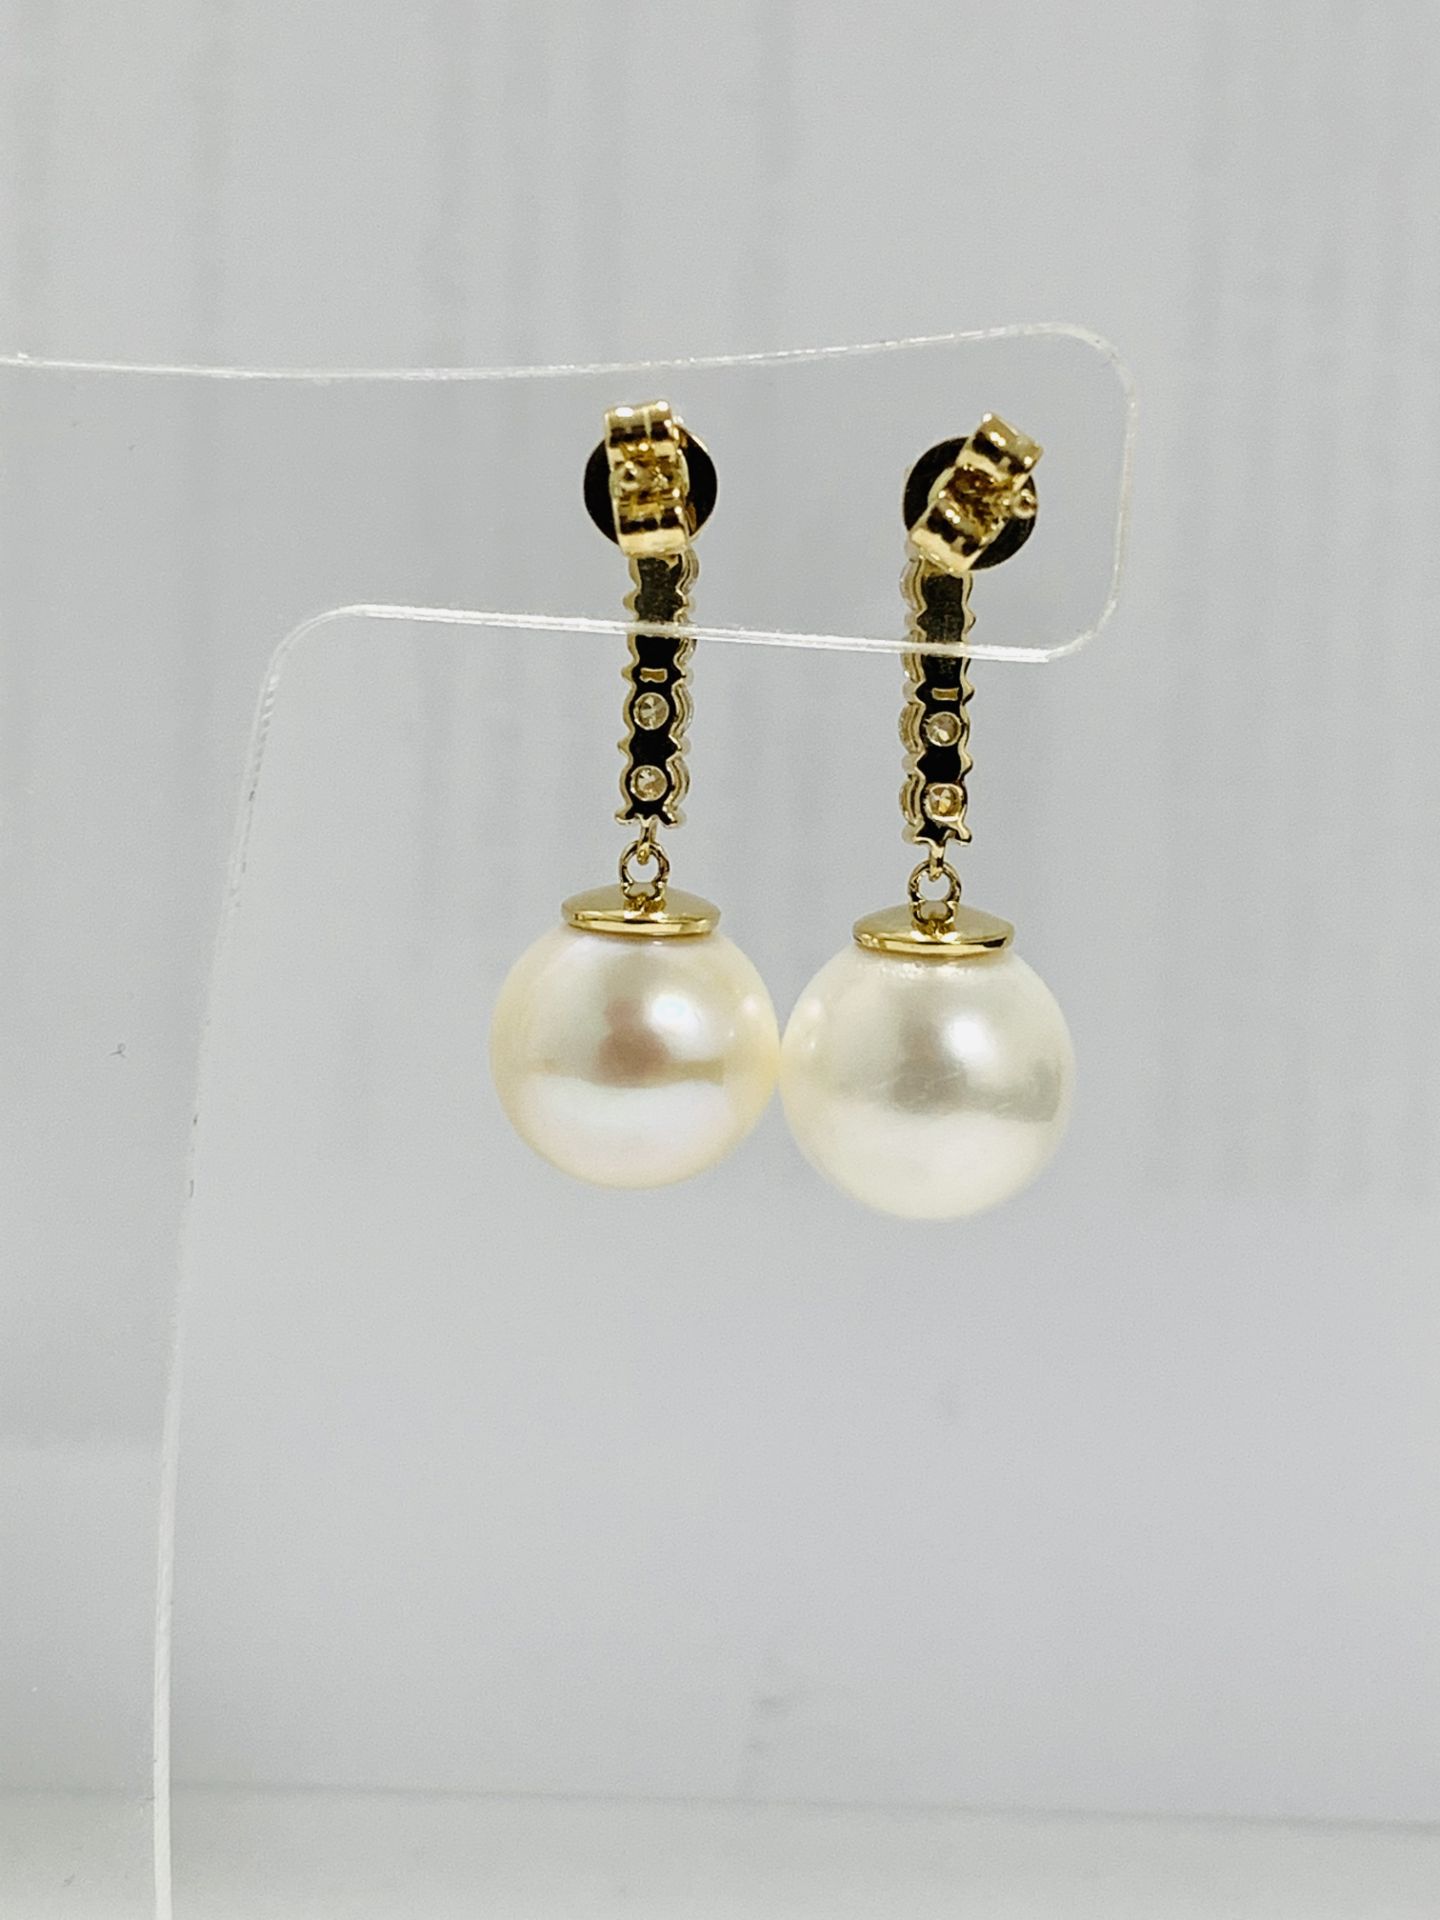 14K Yellow Gold Pair Of Earrings - Image 9 of 11